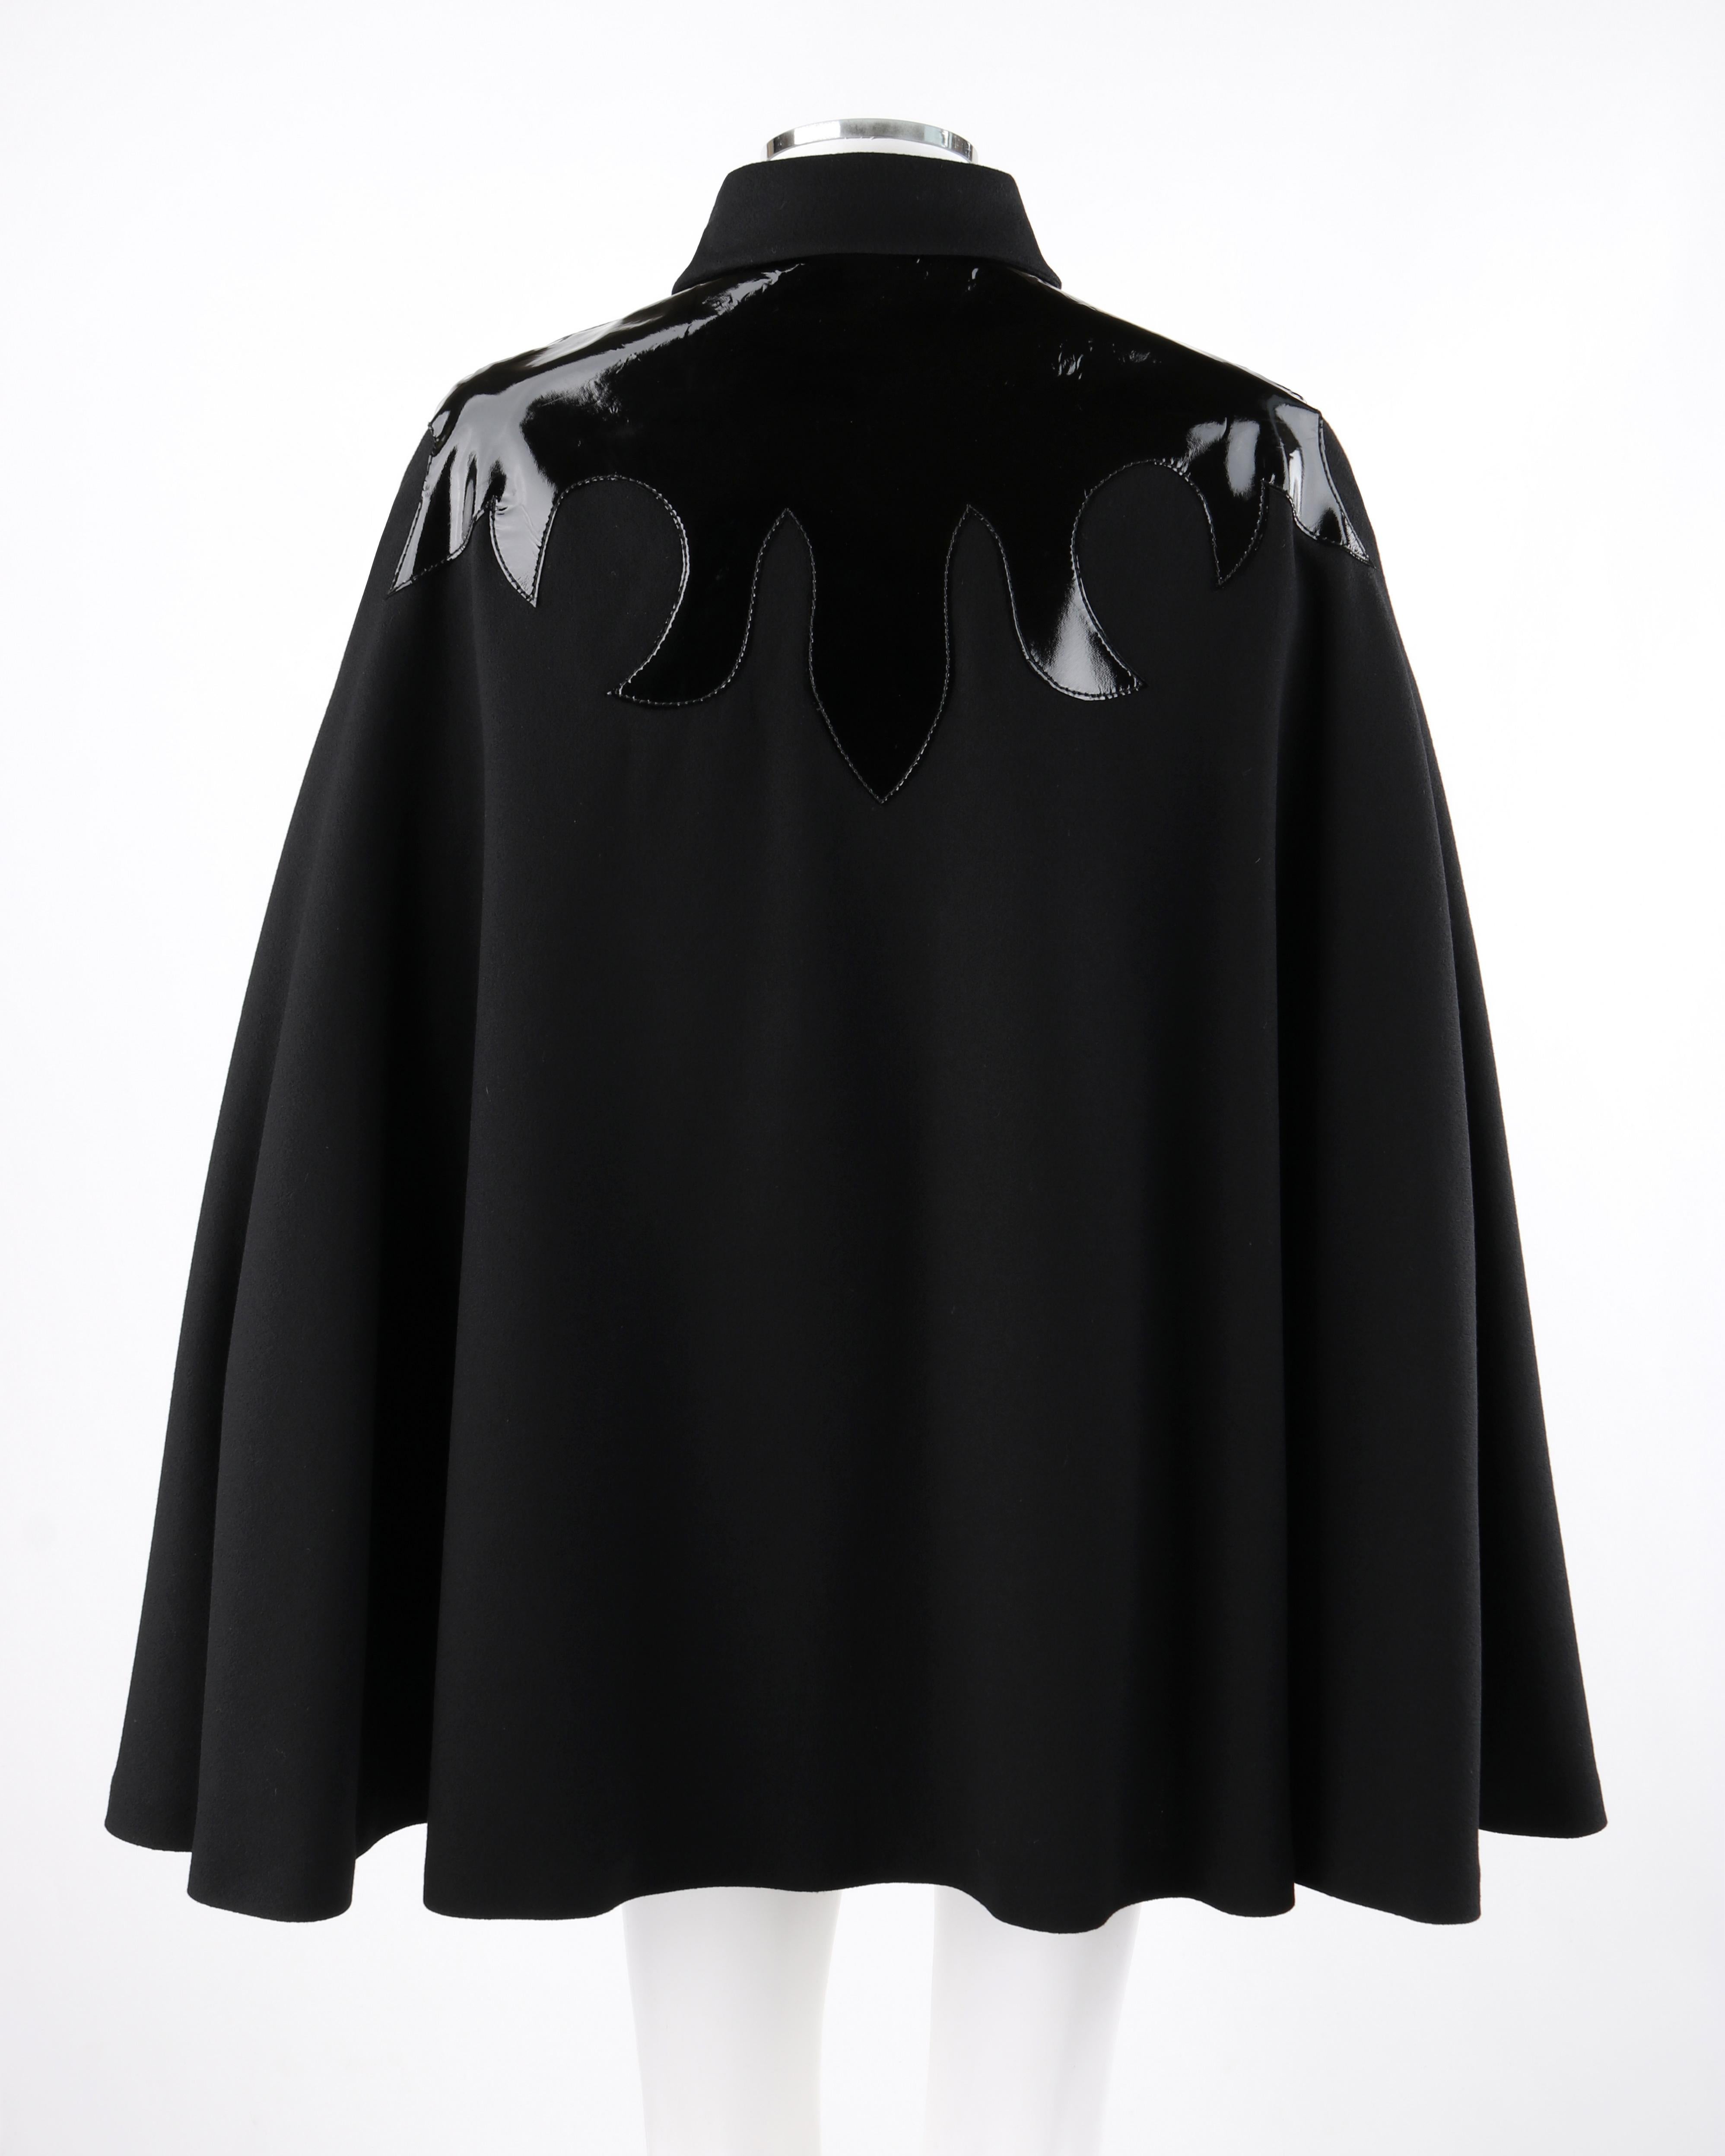 ALEXANDER McQUEEN A/W 2007 “Witches” Black Wool Patent Leather Mantel Cape Coat In Good Condition In Thiensville, WI